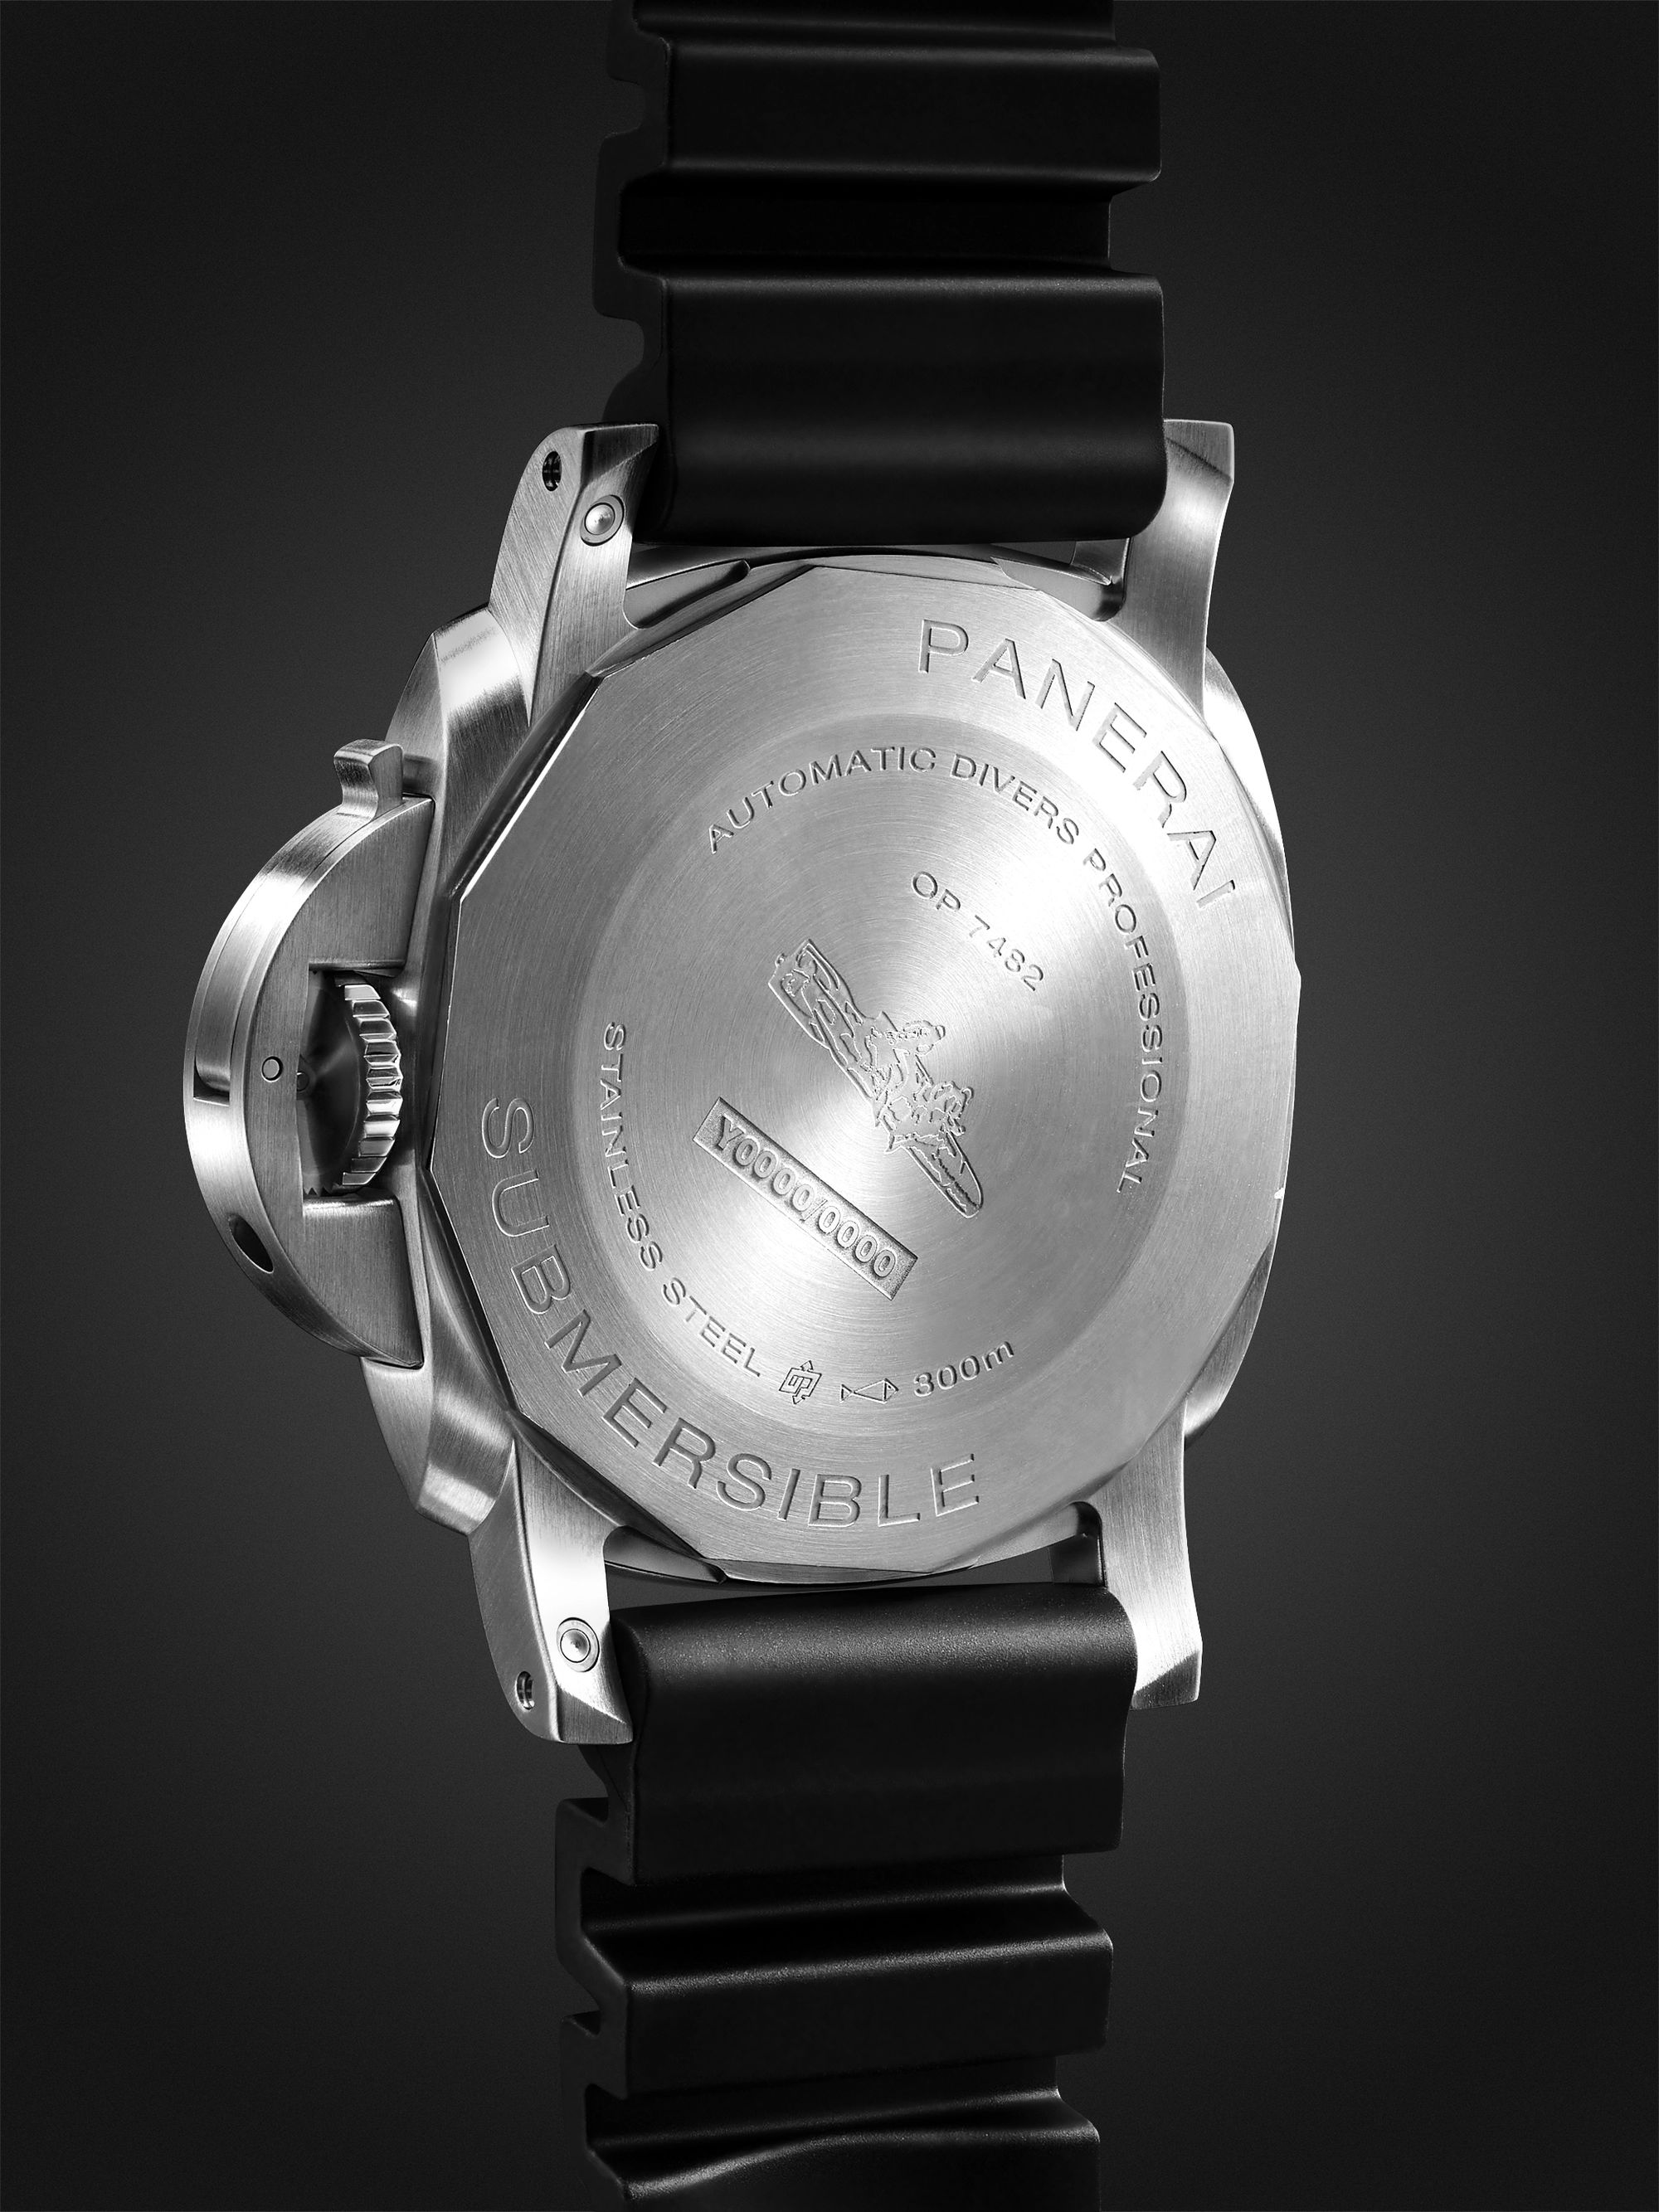 PANERAI Submersible QuarantaQuattro Automatic 44mm Brushed Stainless Steel and Rubber Watch, Ref. No. PAM01229